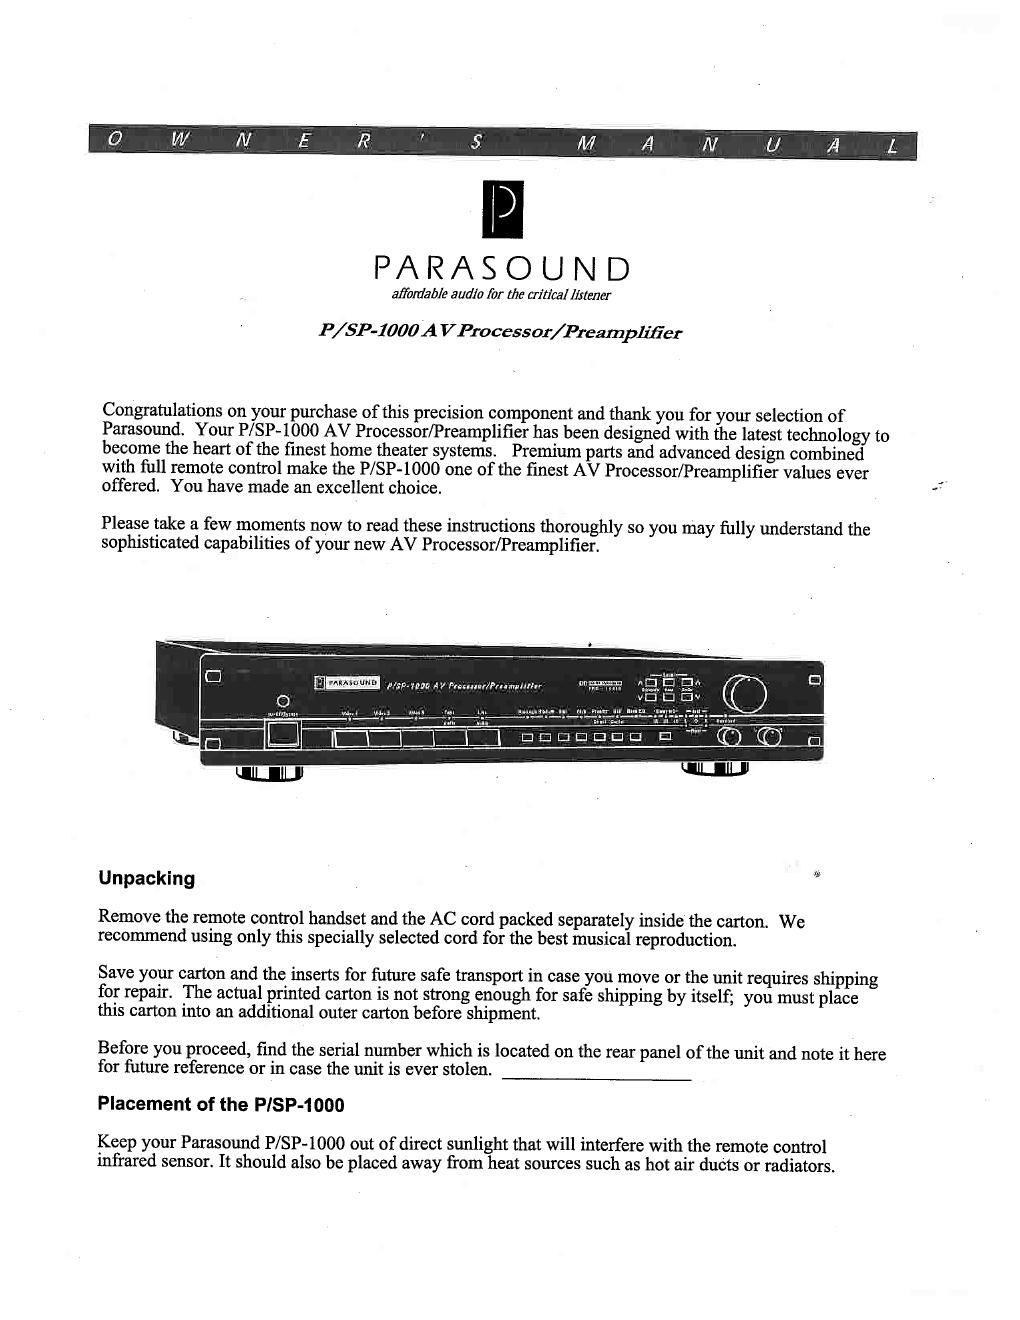 parasound psp 1000 owners manual